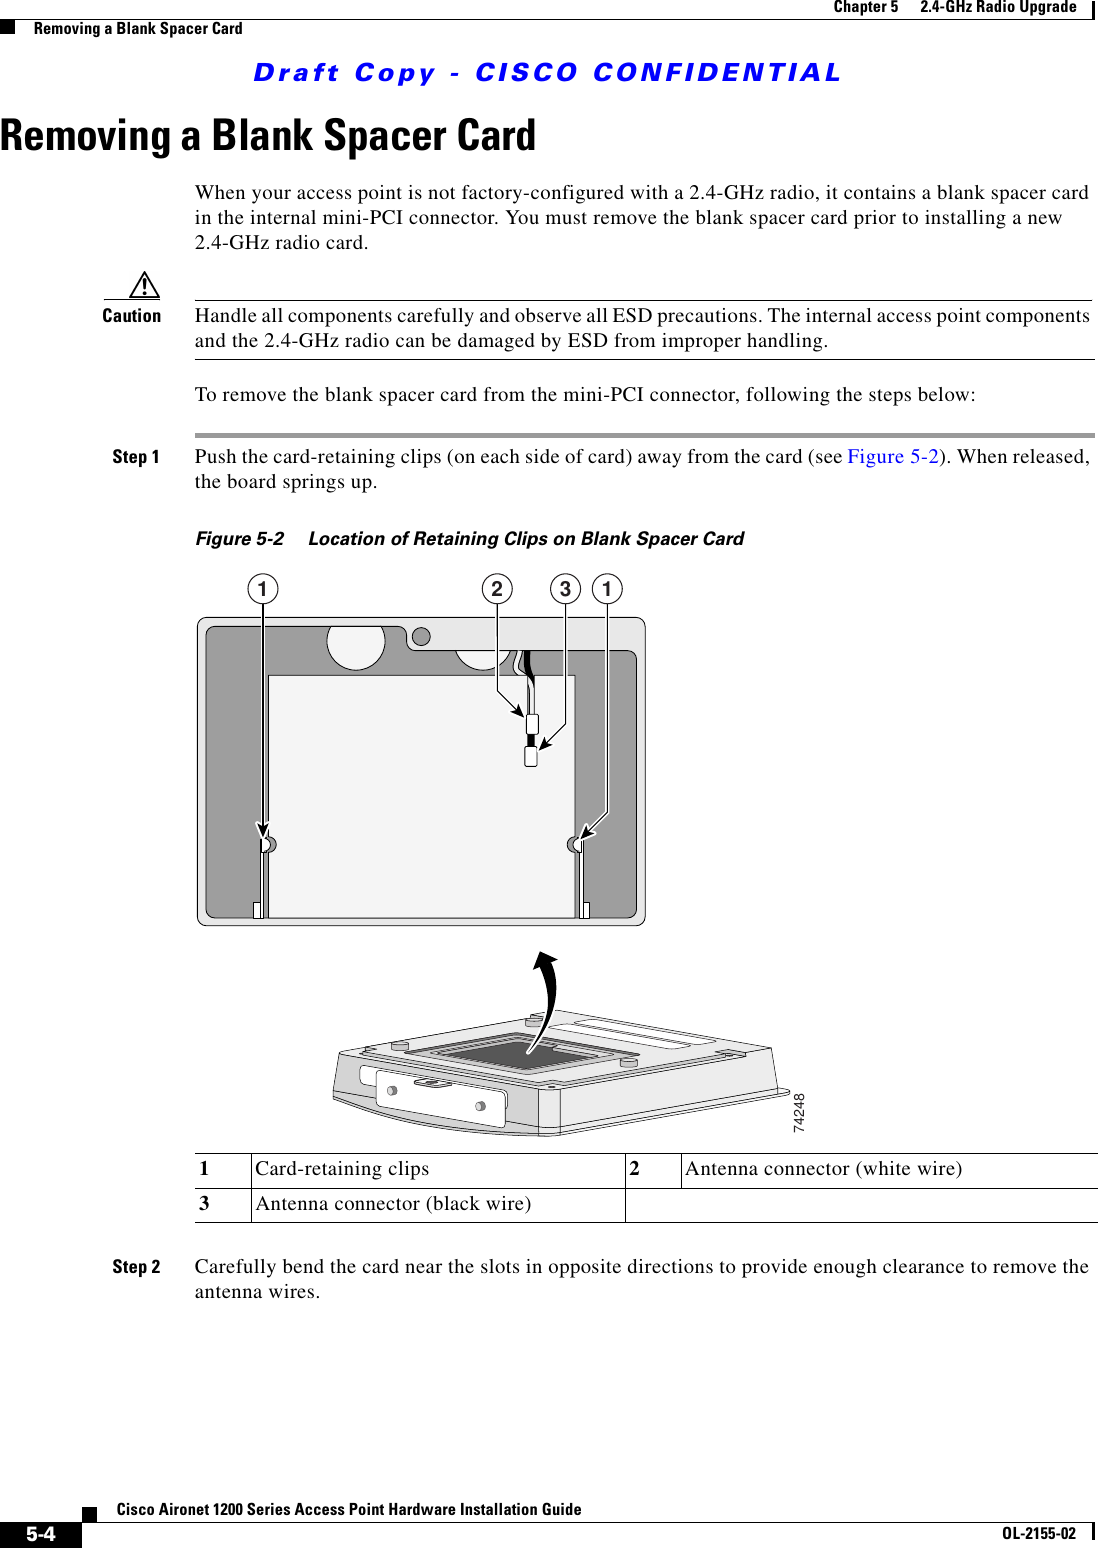 Draft Copy - CISCO CONFIDENTIAL 5-4Cisco Aironet 1200 Series Access Point Hardware Installation GuideOL-2155-02Chapter 5      2.4-GHz Radio UpgradeRemoving a Blank Spacer CardRemoving a Blank Spacer CardWhen your access point is not factory-configured with a 2.4-GHz radio, it contains a blank spacer card in the internal mini-PCI connector. You must remove the blank spacer card prior to installing a new 2.4-GHz radio card.Caution Handle all components carefully and observe all ESD precautions. The internal access point components and the 2.4-GHz radio can be damaged by ESD from improper handling. To remove the blank spacer card from the mini-PCI connector, following the steps below:Step 1 Push the card-retaining clips (on each side of card) away from the card (see Figure 5-2). When released, the board springs up.Figure 5-2 Location of Retaining Clips on Blank Spacer CardStep 2 Carefully bend the card near the slots in opposite directions to provide enough clearance to remove the antenna wires.1Card-retaining clips 2Antenna connector (white wire)3Antenna connector (black wire)742481 3 12